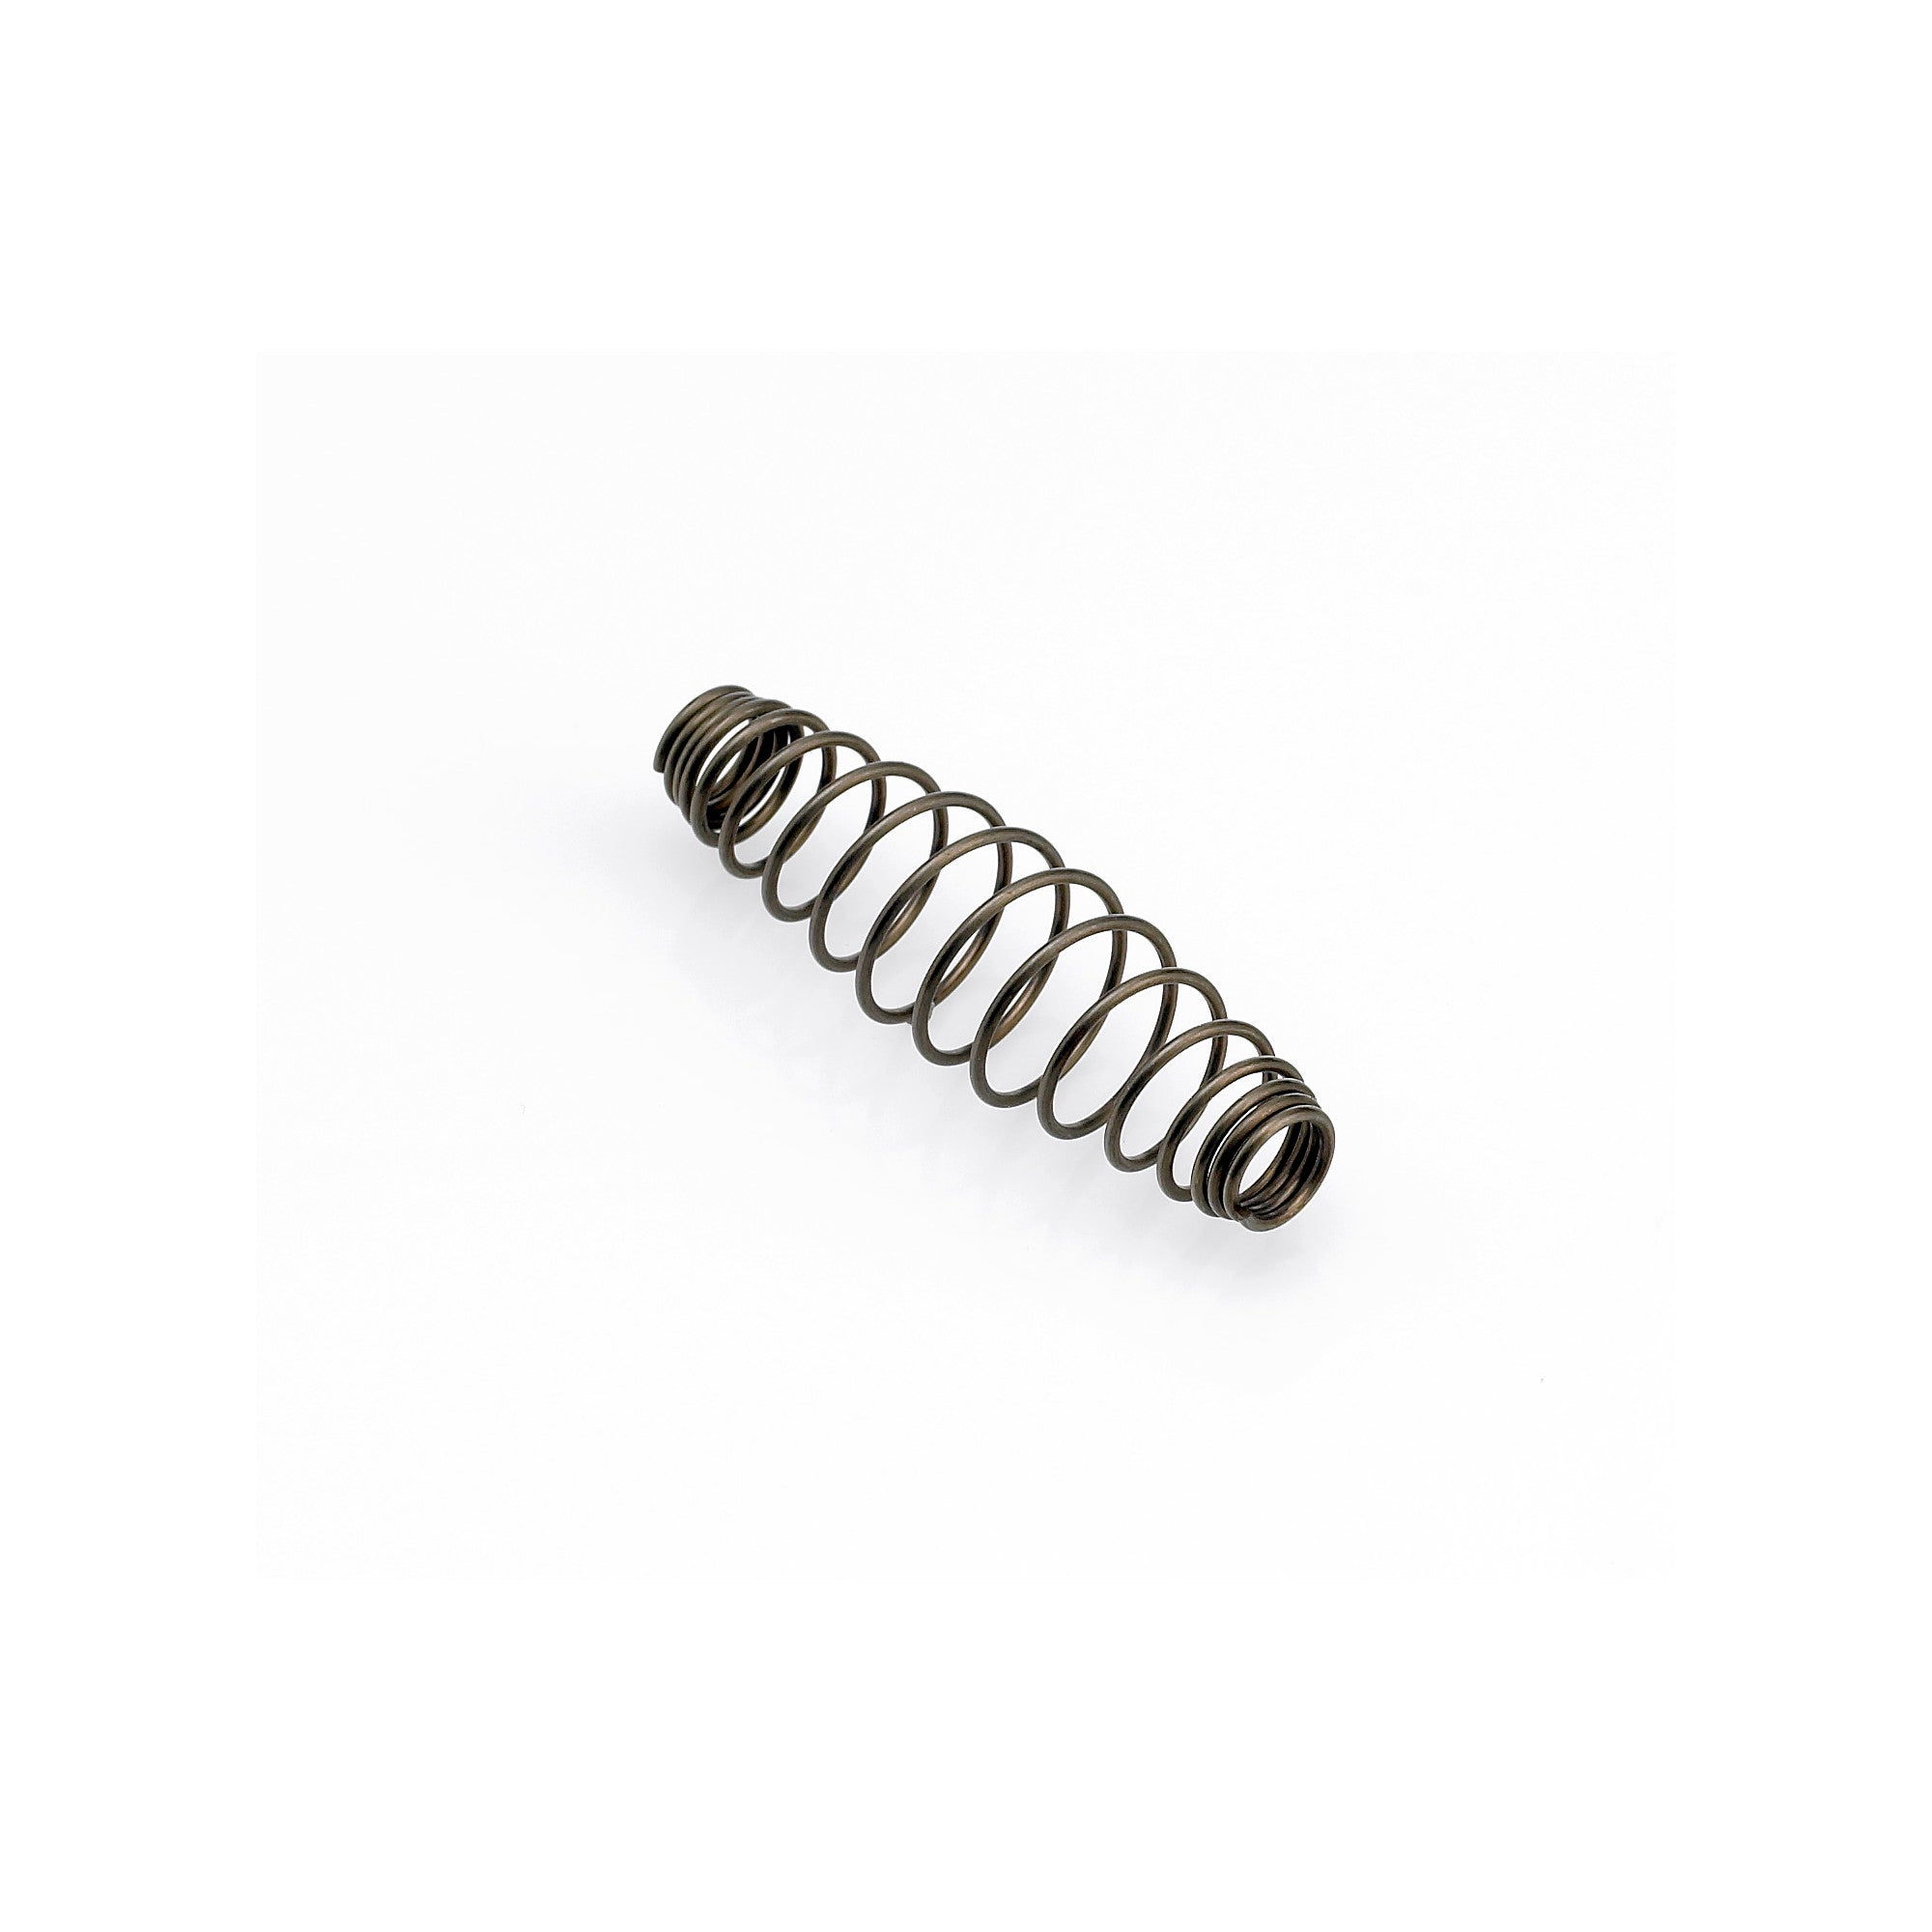 Replacement Spring for Shears